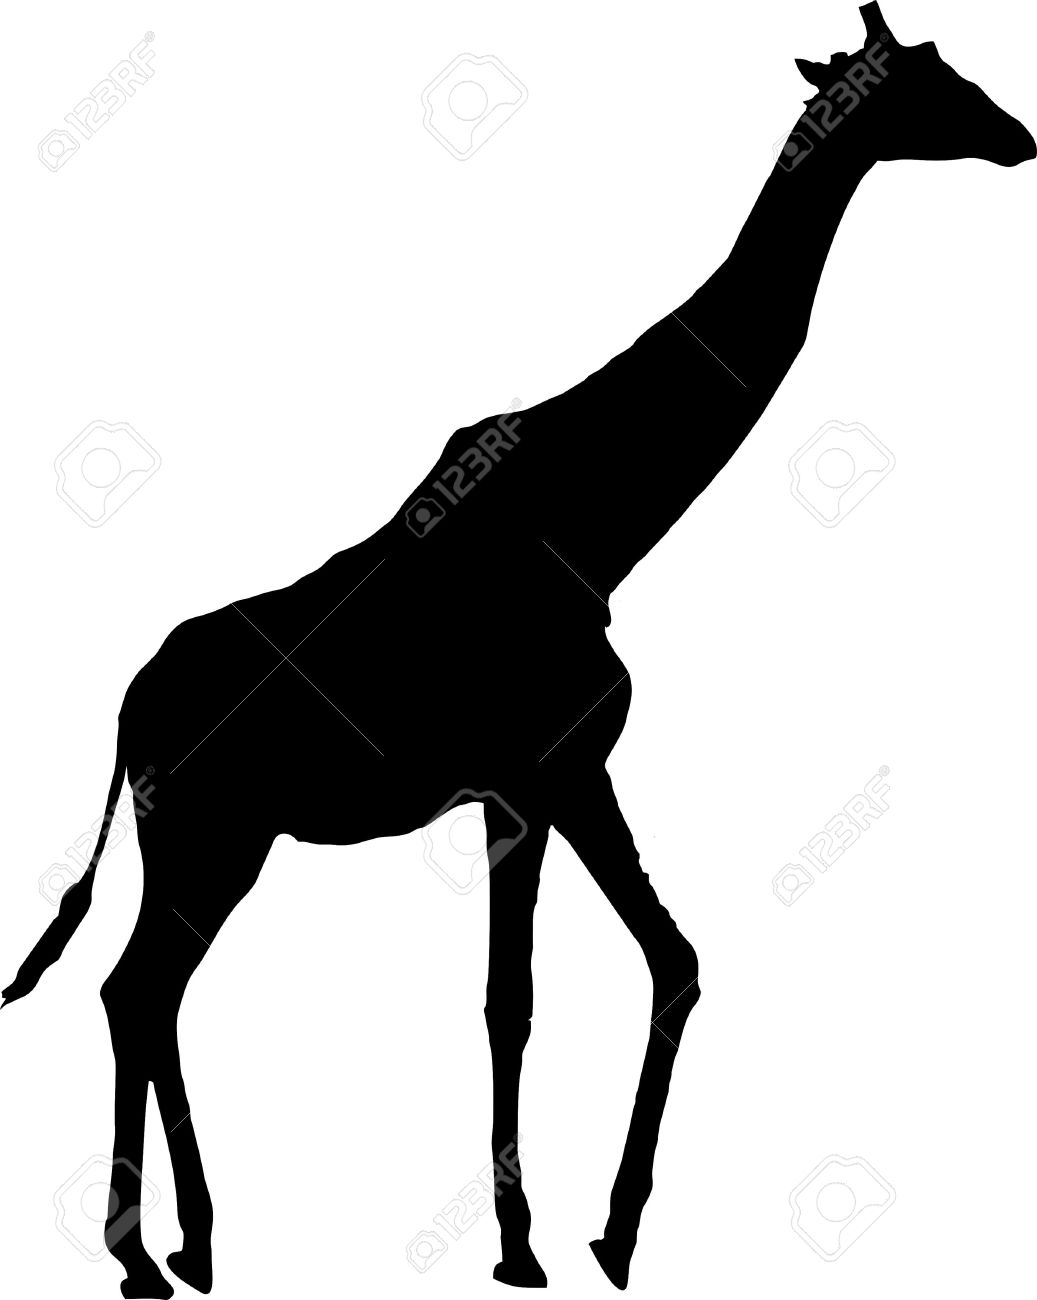 Giraffe Silhouette Isolated Vector Illustration Royalty Free. Print Save this clip art